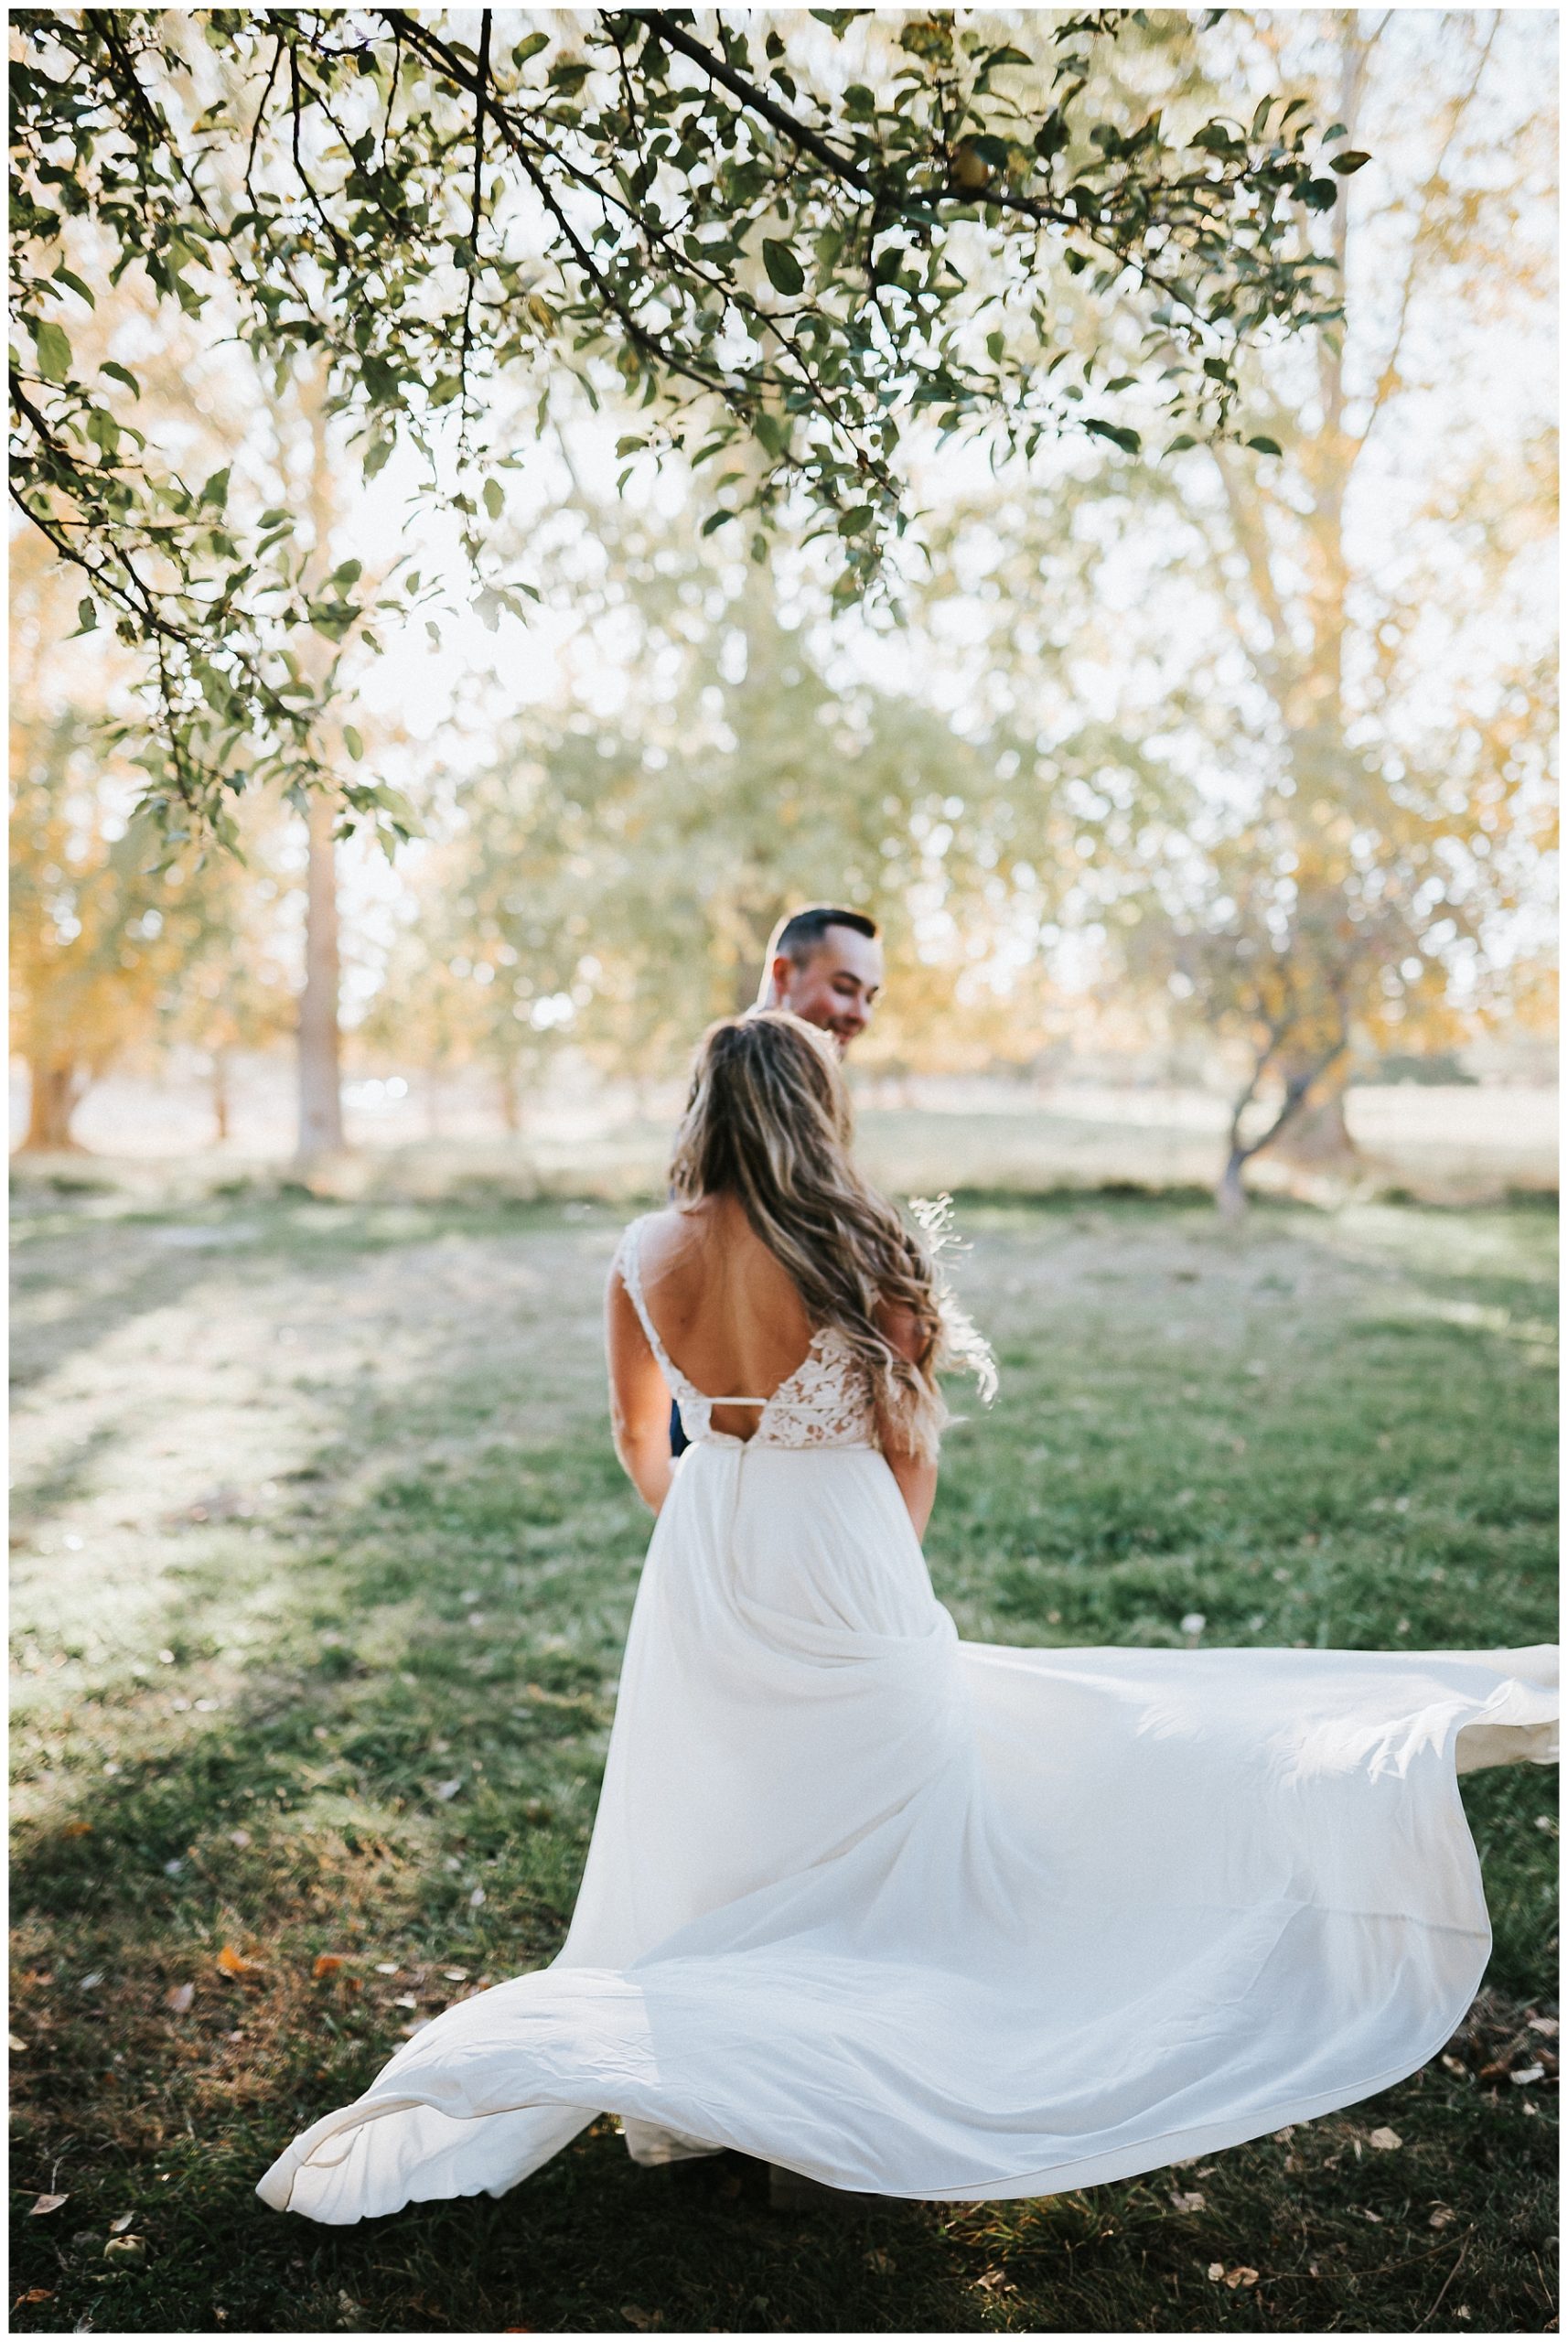 boho-bride-and-groom-dancing-first-dance--long-wedding-dress-with-train-bride-and-groom-flowy-wedding-dress-fall-wedding-twin-falls-idaho-wedding-photographer-finch-film-and-photo